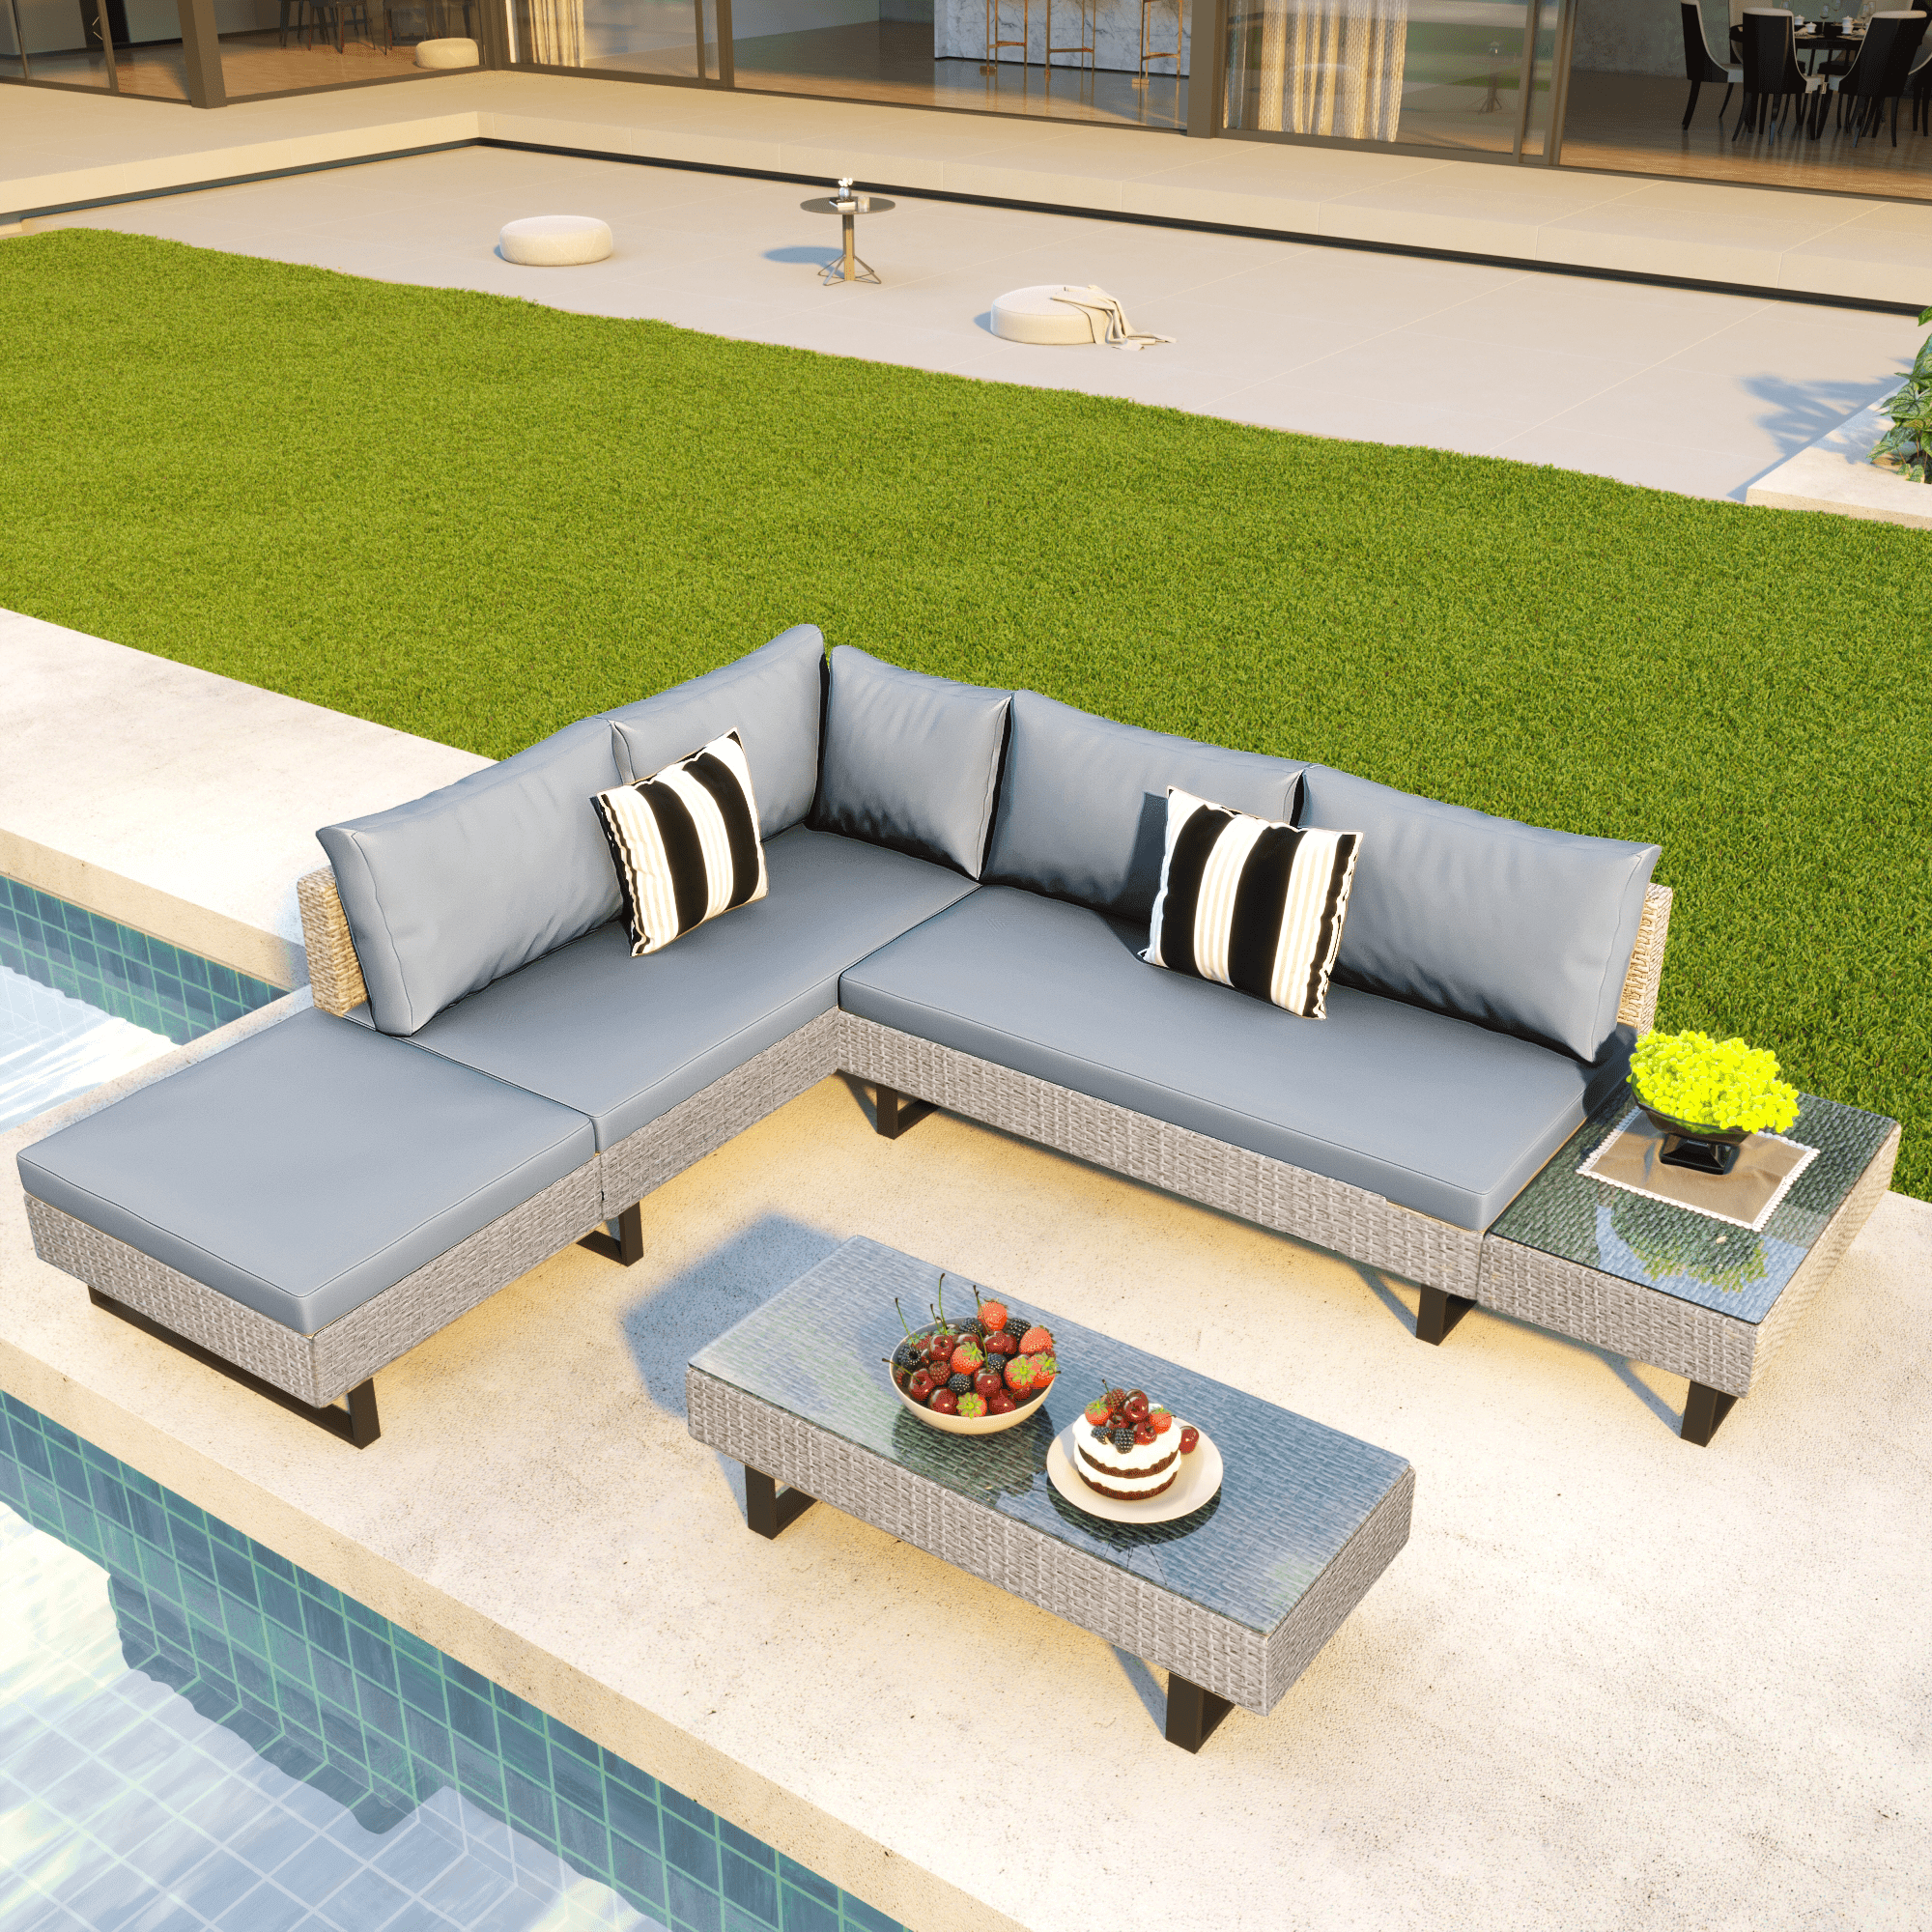 Shop GO 3-piece Outdoor Wicker Sofa Patio Furniture Set, L-shaped Corner Sofa, Water And UV Protected, Two Glass Table, Adjustable Feet And 3.1" Thicker Cushion, Light Gray Cushion and Beige Wicker Mademoiselle Home Decor